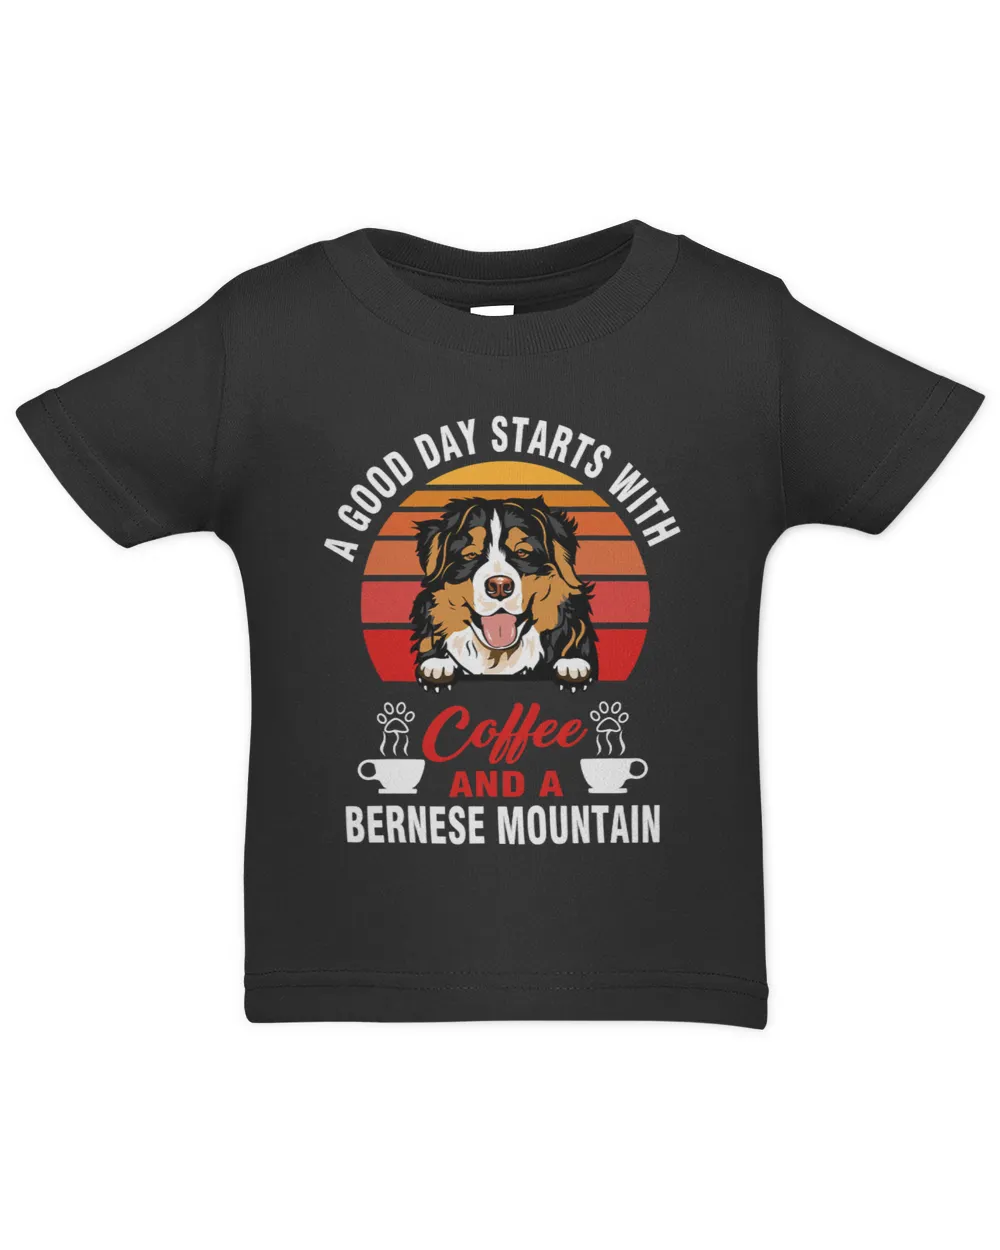 A Good Day Starts With Coffee And A Bernese Mountain Dog